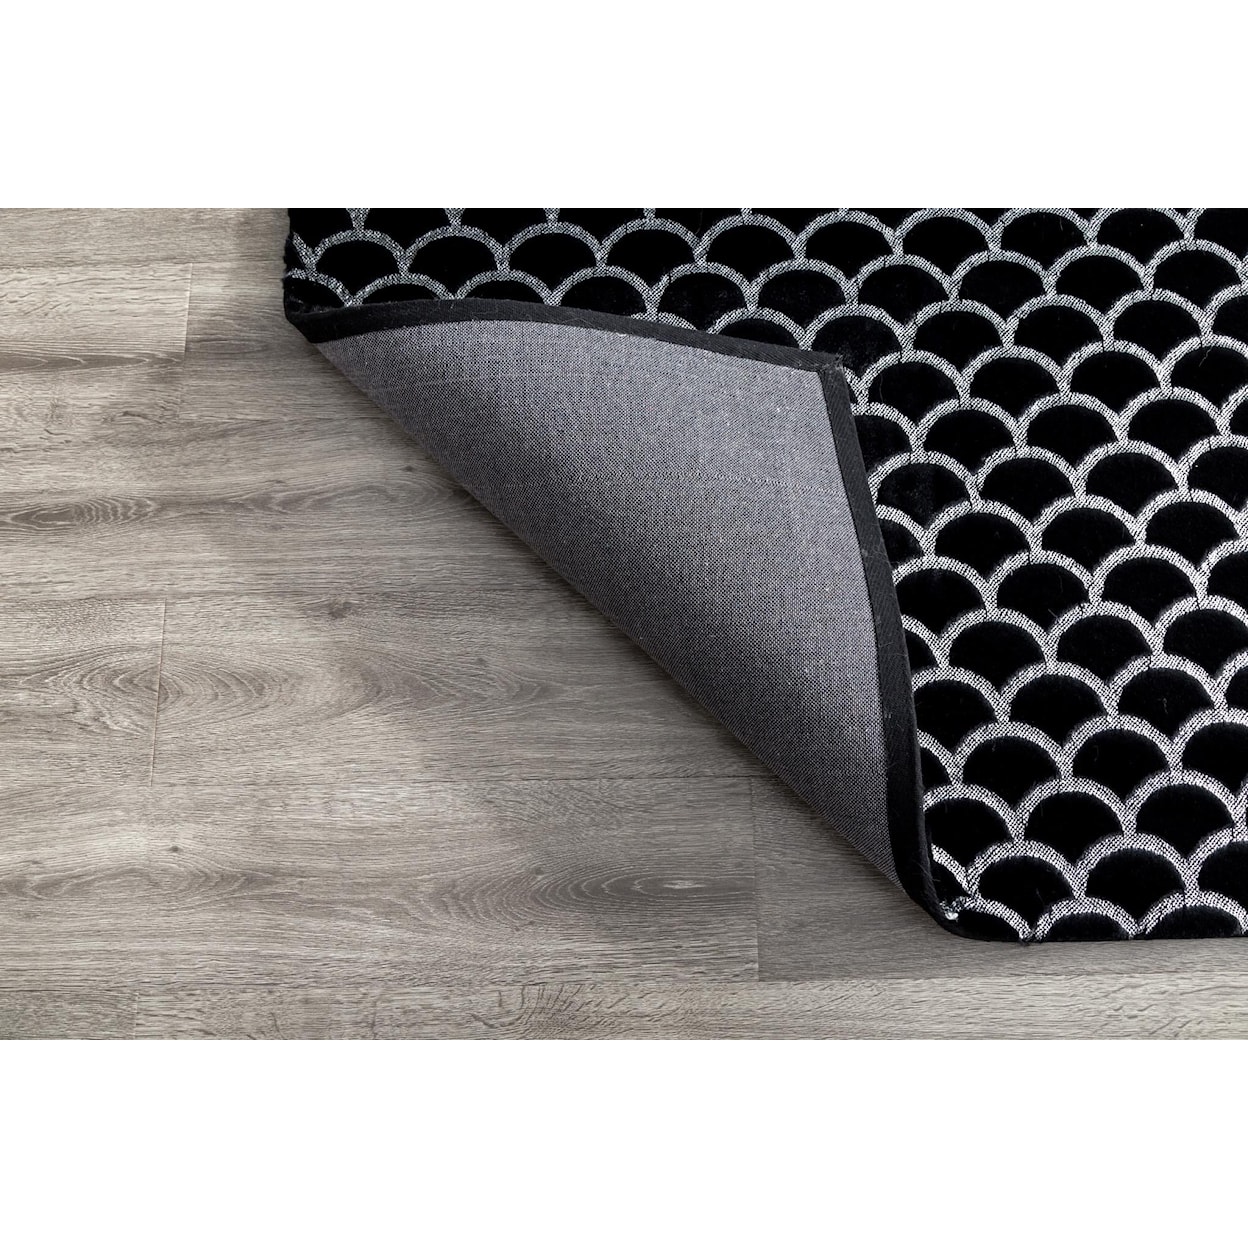 MDA Rugs Chryso Collection CHRYSO 5X7 BLACK/SILVER RUG |